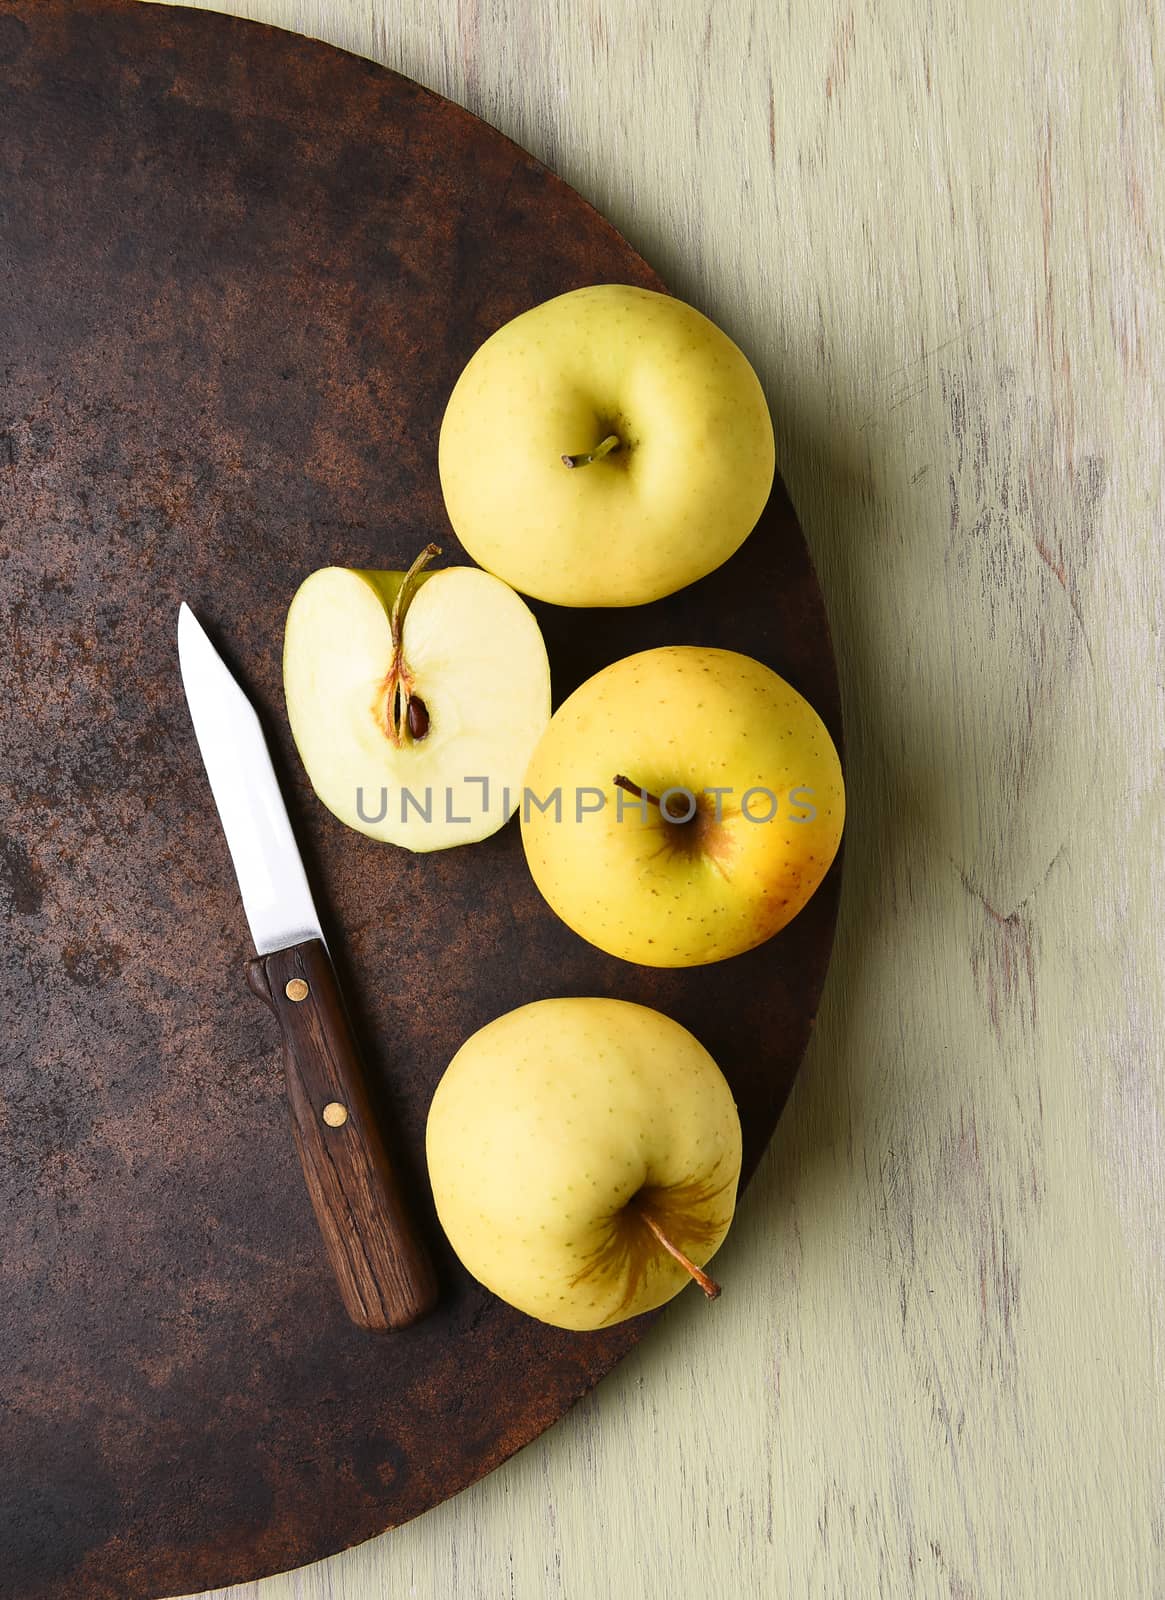 Golden Delicious apple still life with knife. Dark round surface on rustic table.